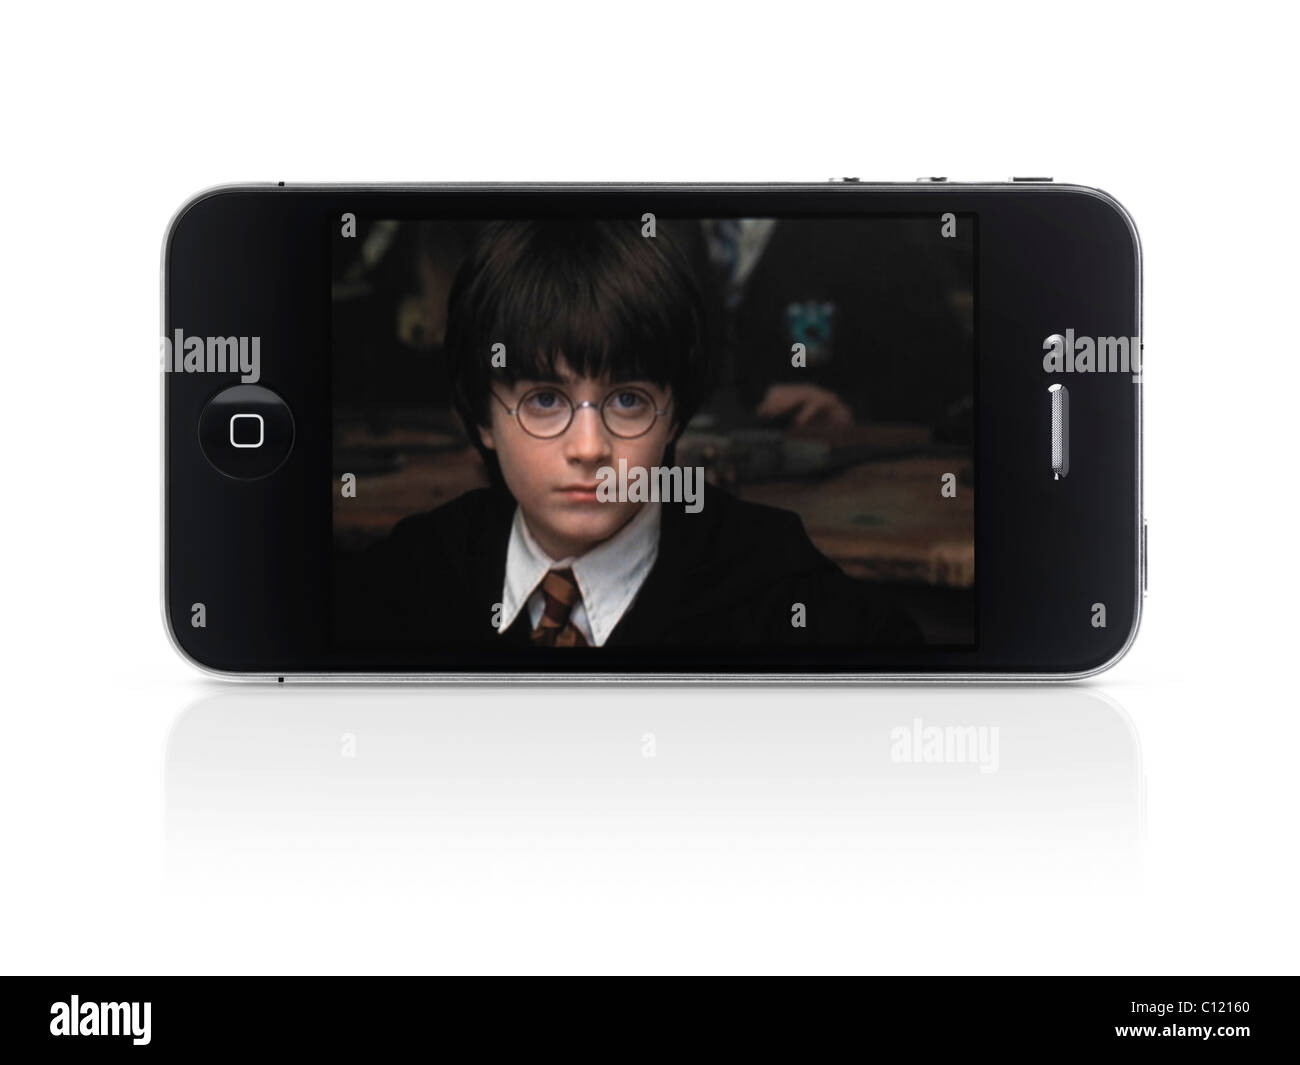 Harry Potter movie on display of Apple iPhone 4 smartphone isolated with clipping path on white background Stock Photo